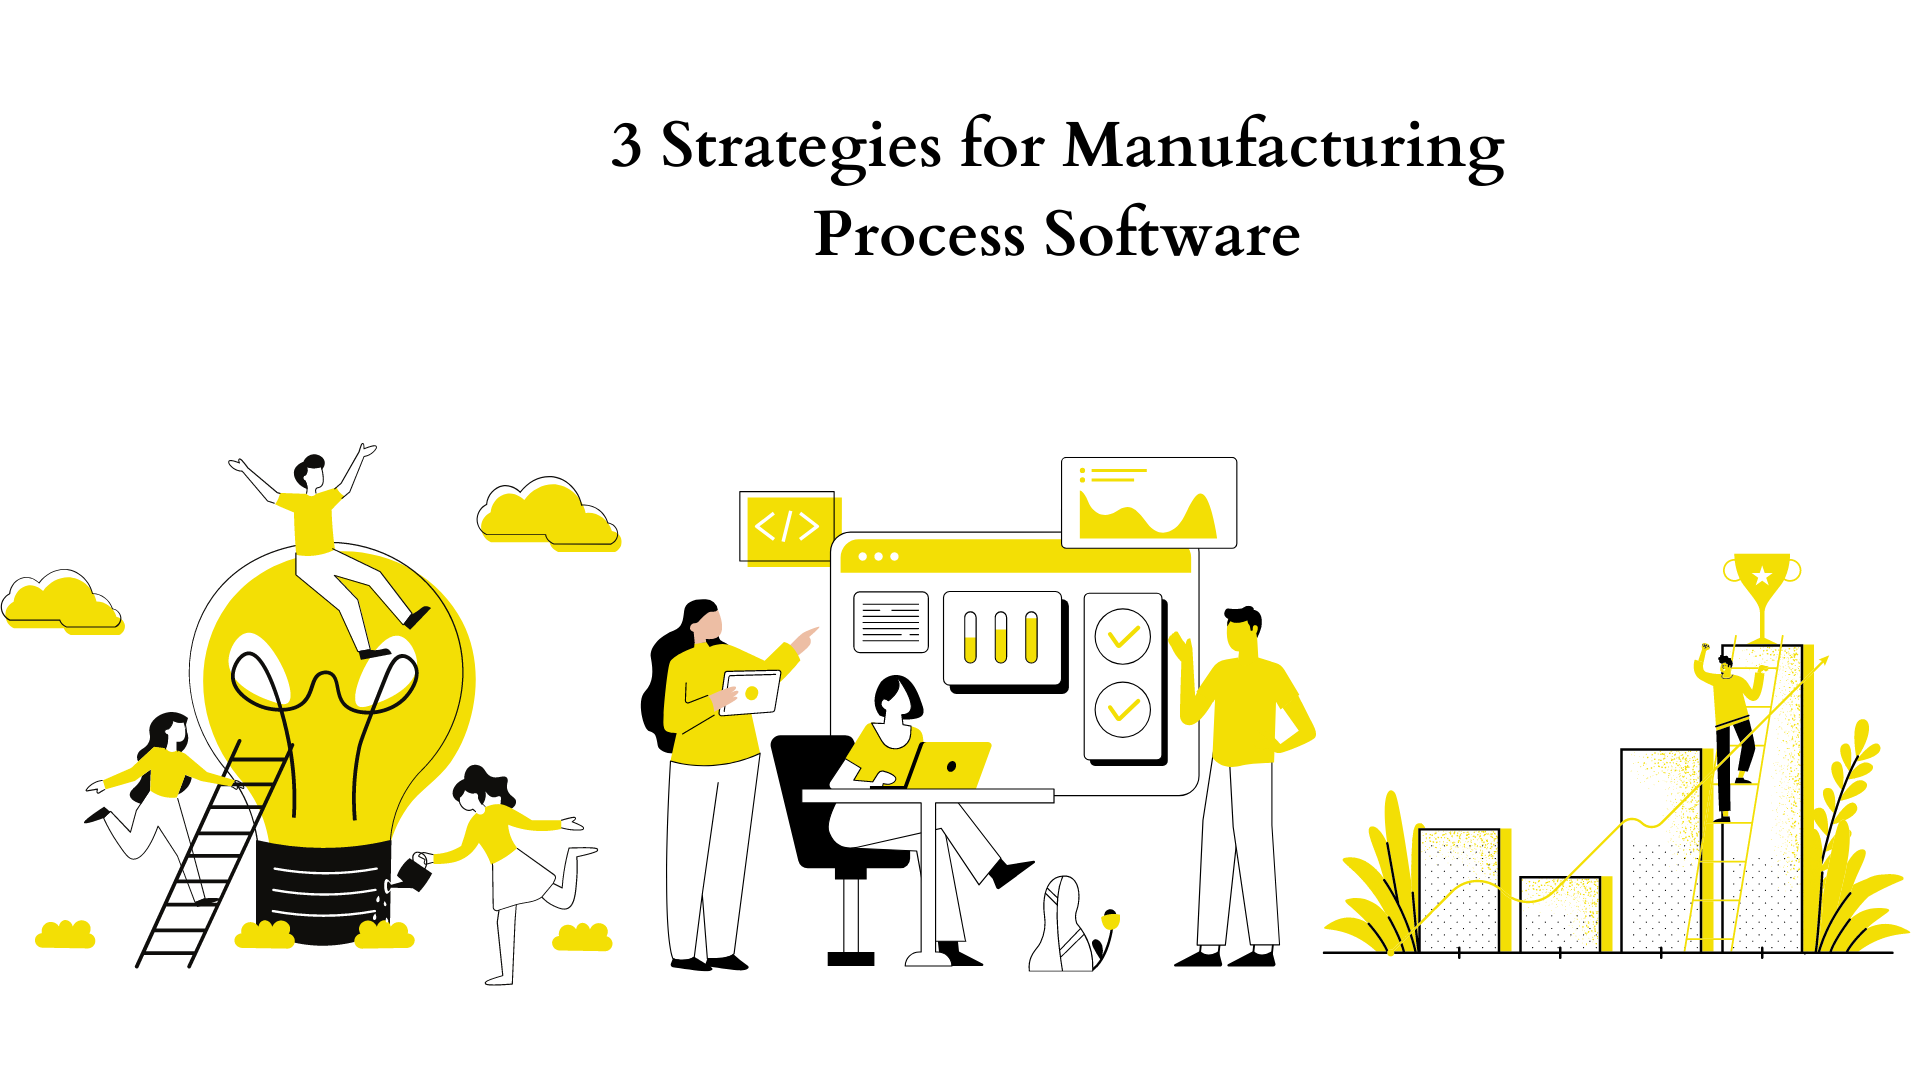 3 Strategies for Manufacturing Process Software